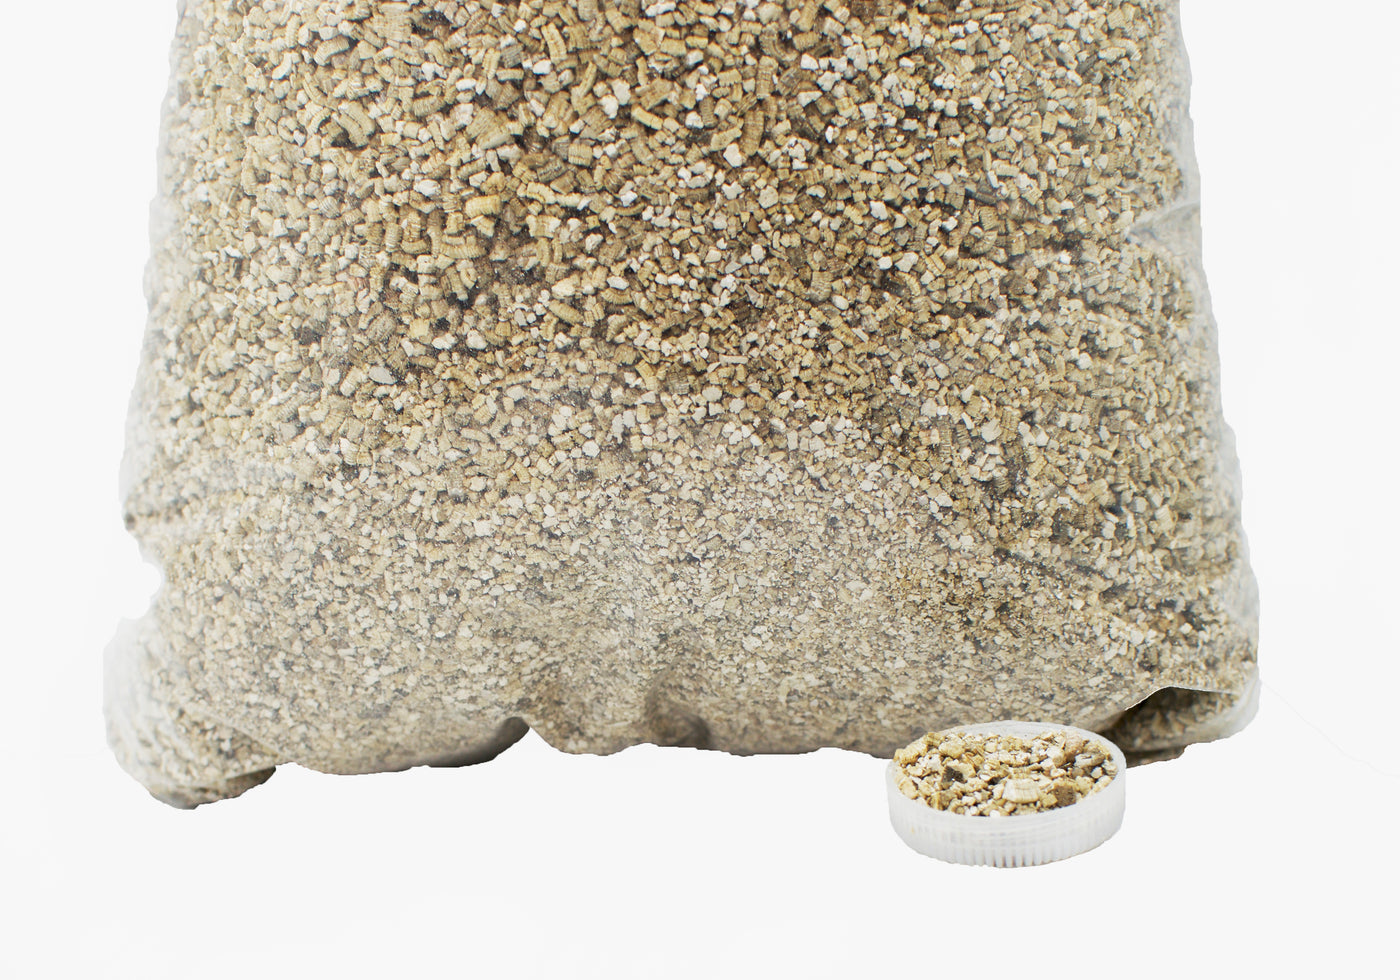 Vermiculite Substrate and Incubation Media